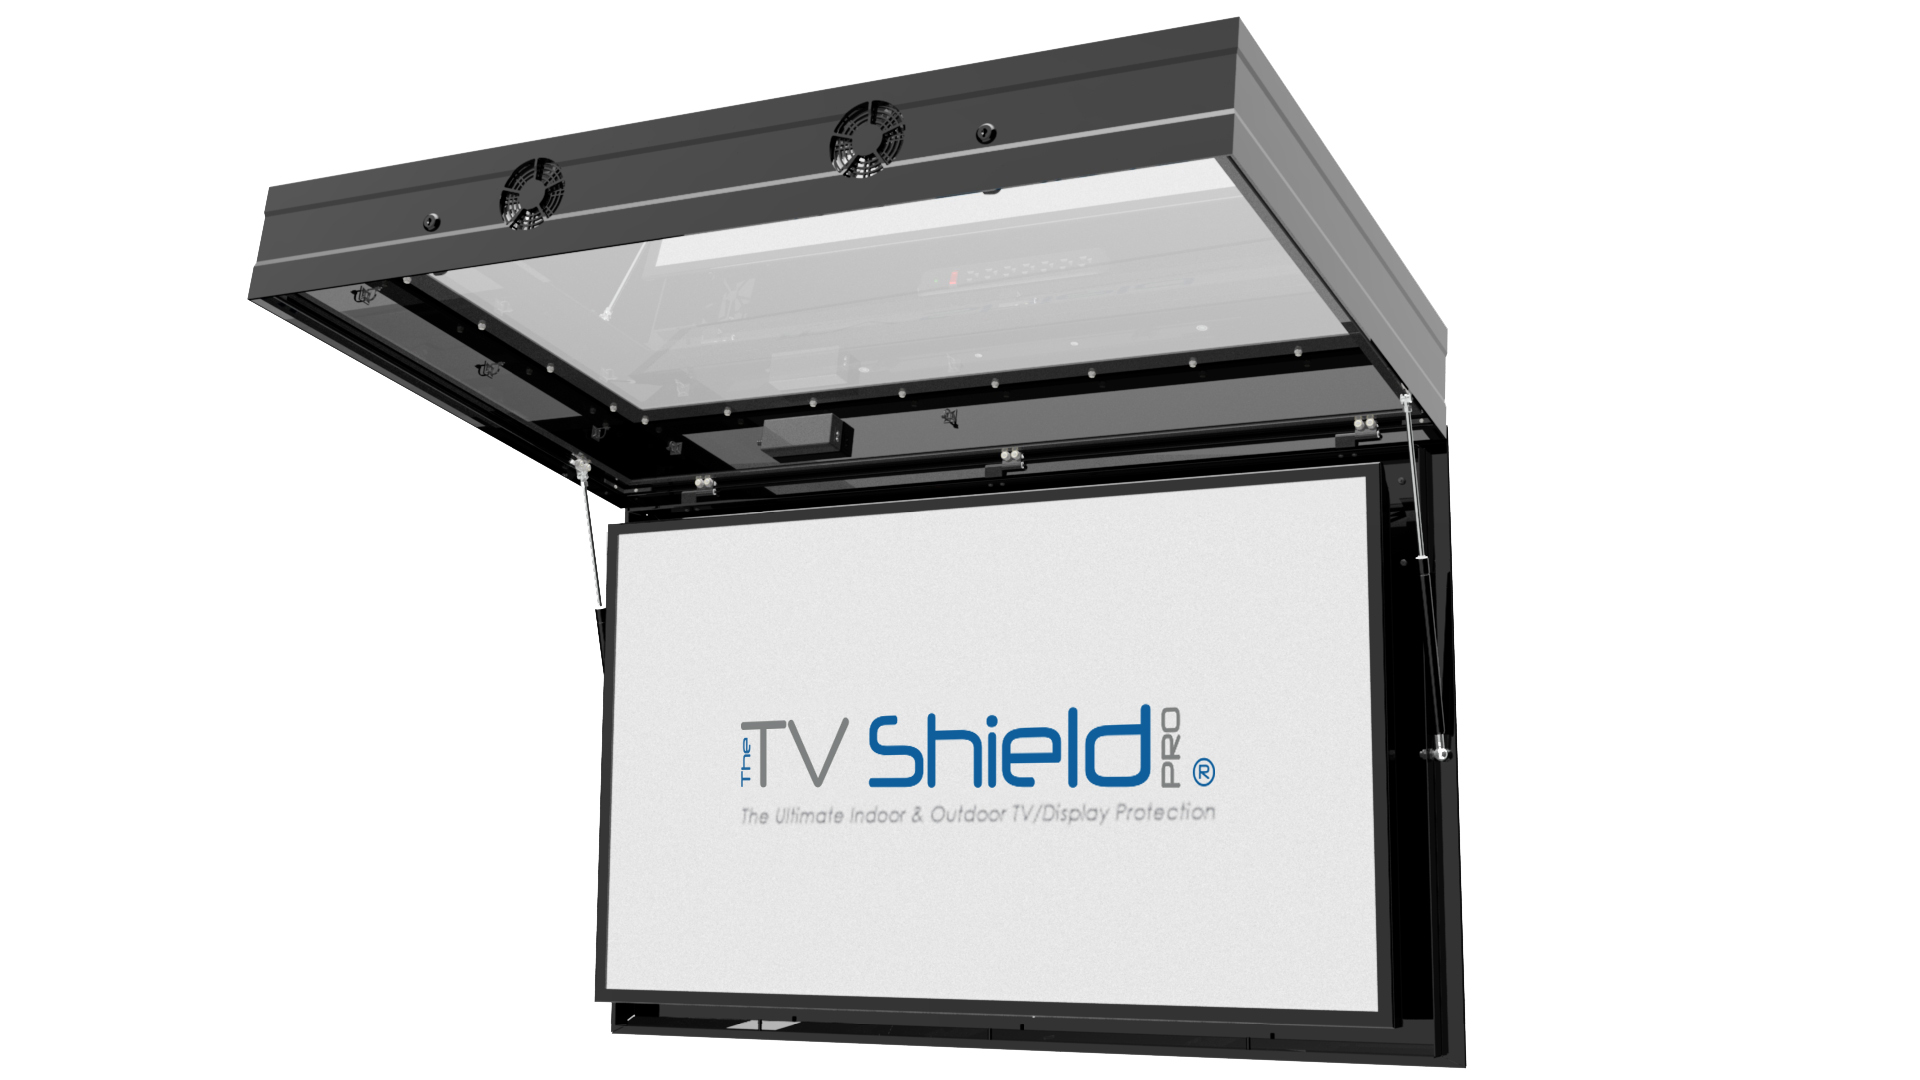 The TV Shield PRO Touch Launching at IAAPA